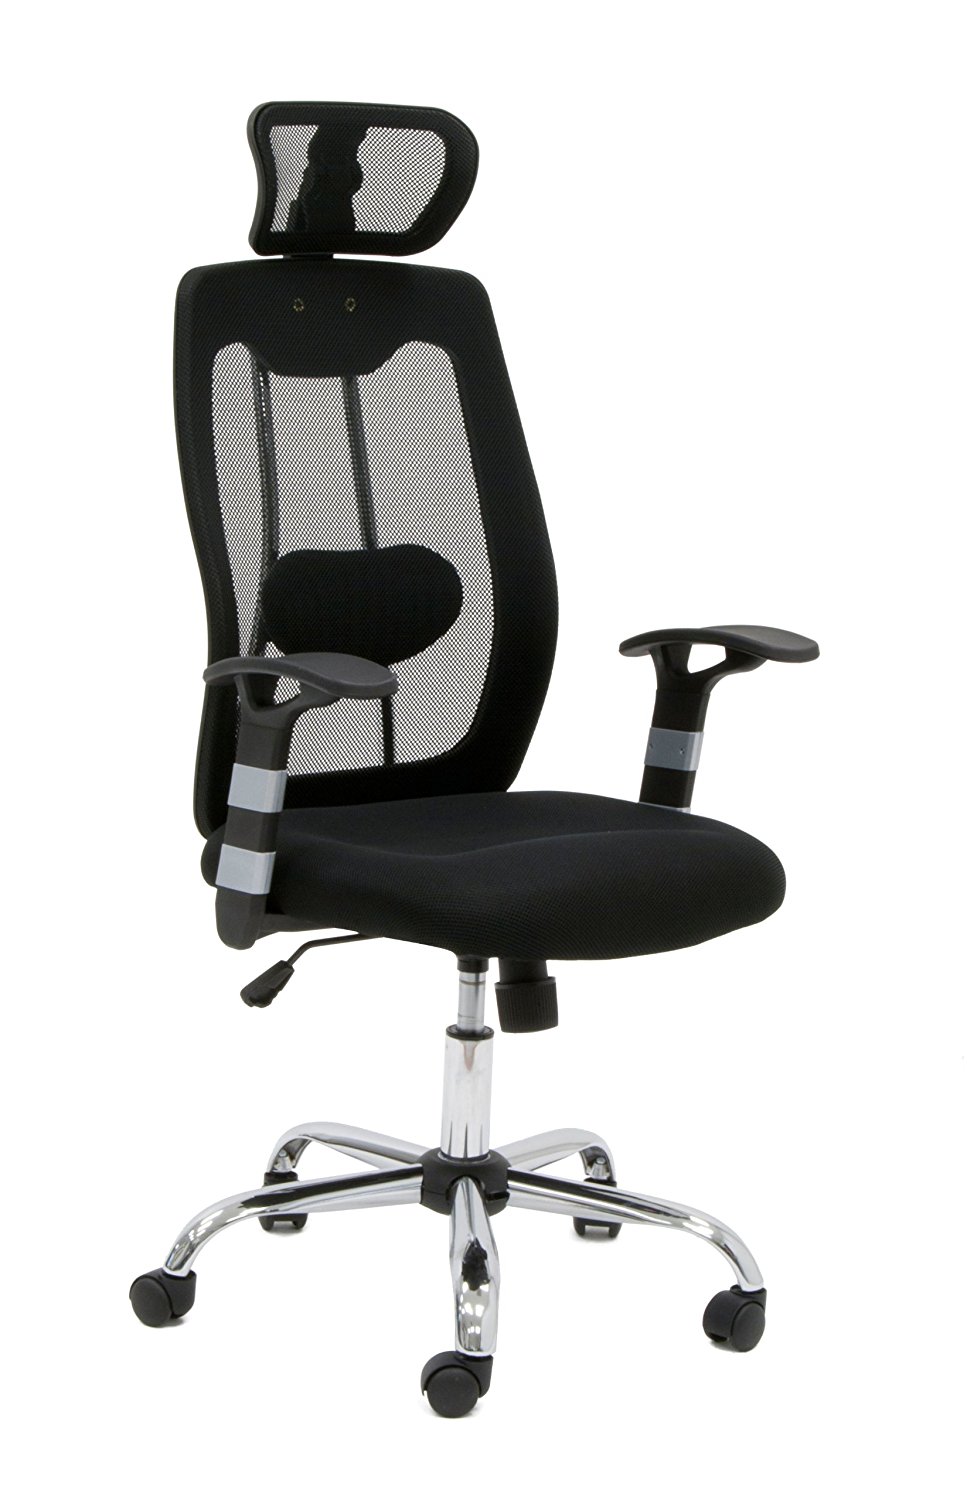 Best Chair For Home Recording Studio - StayOnBeat